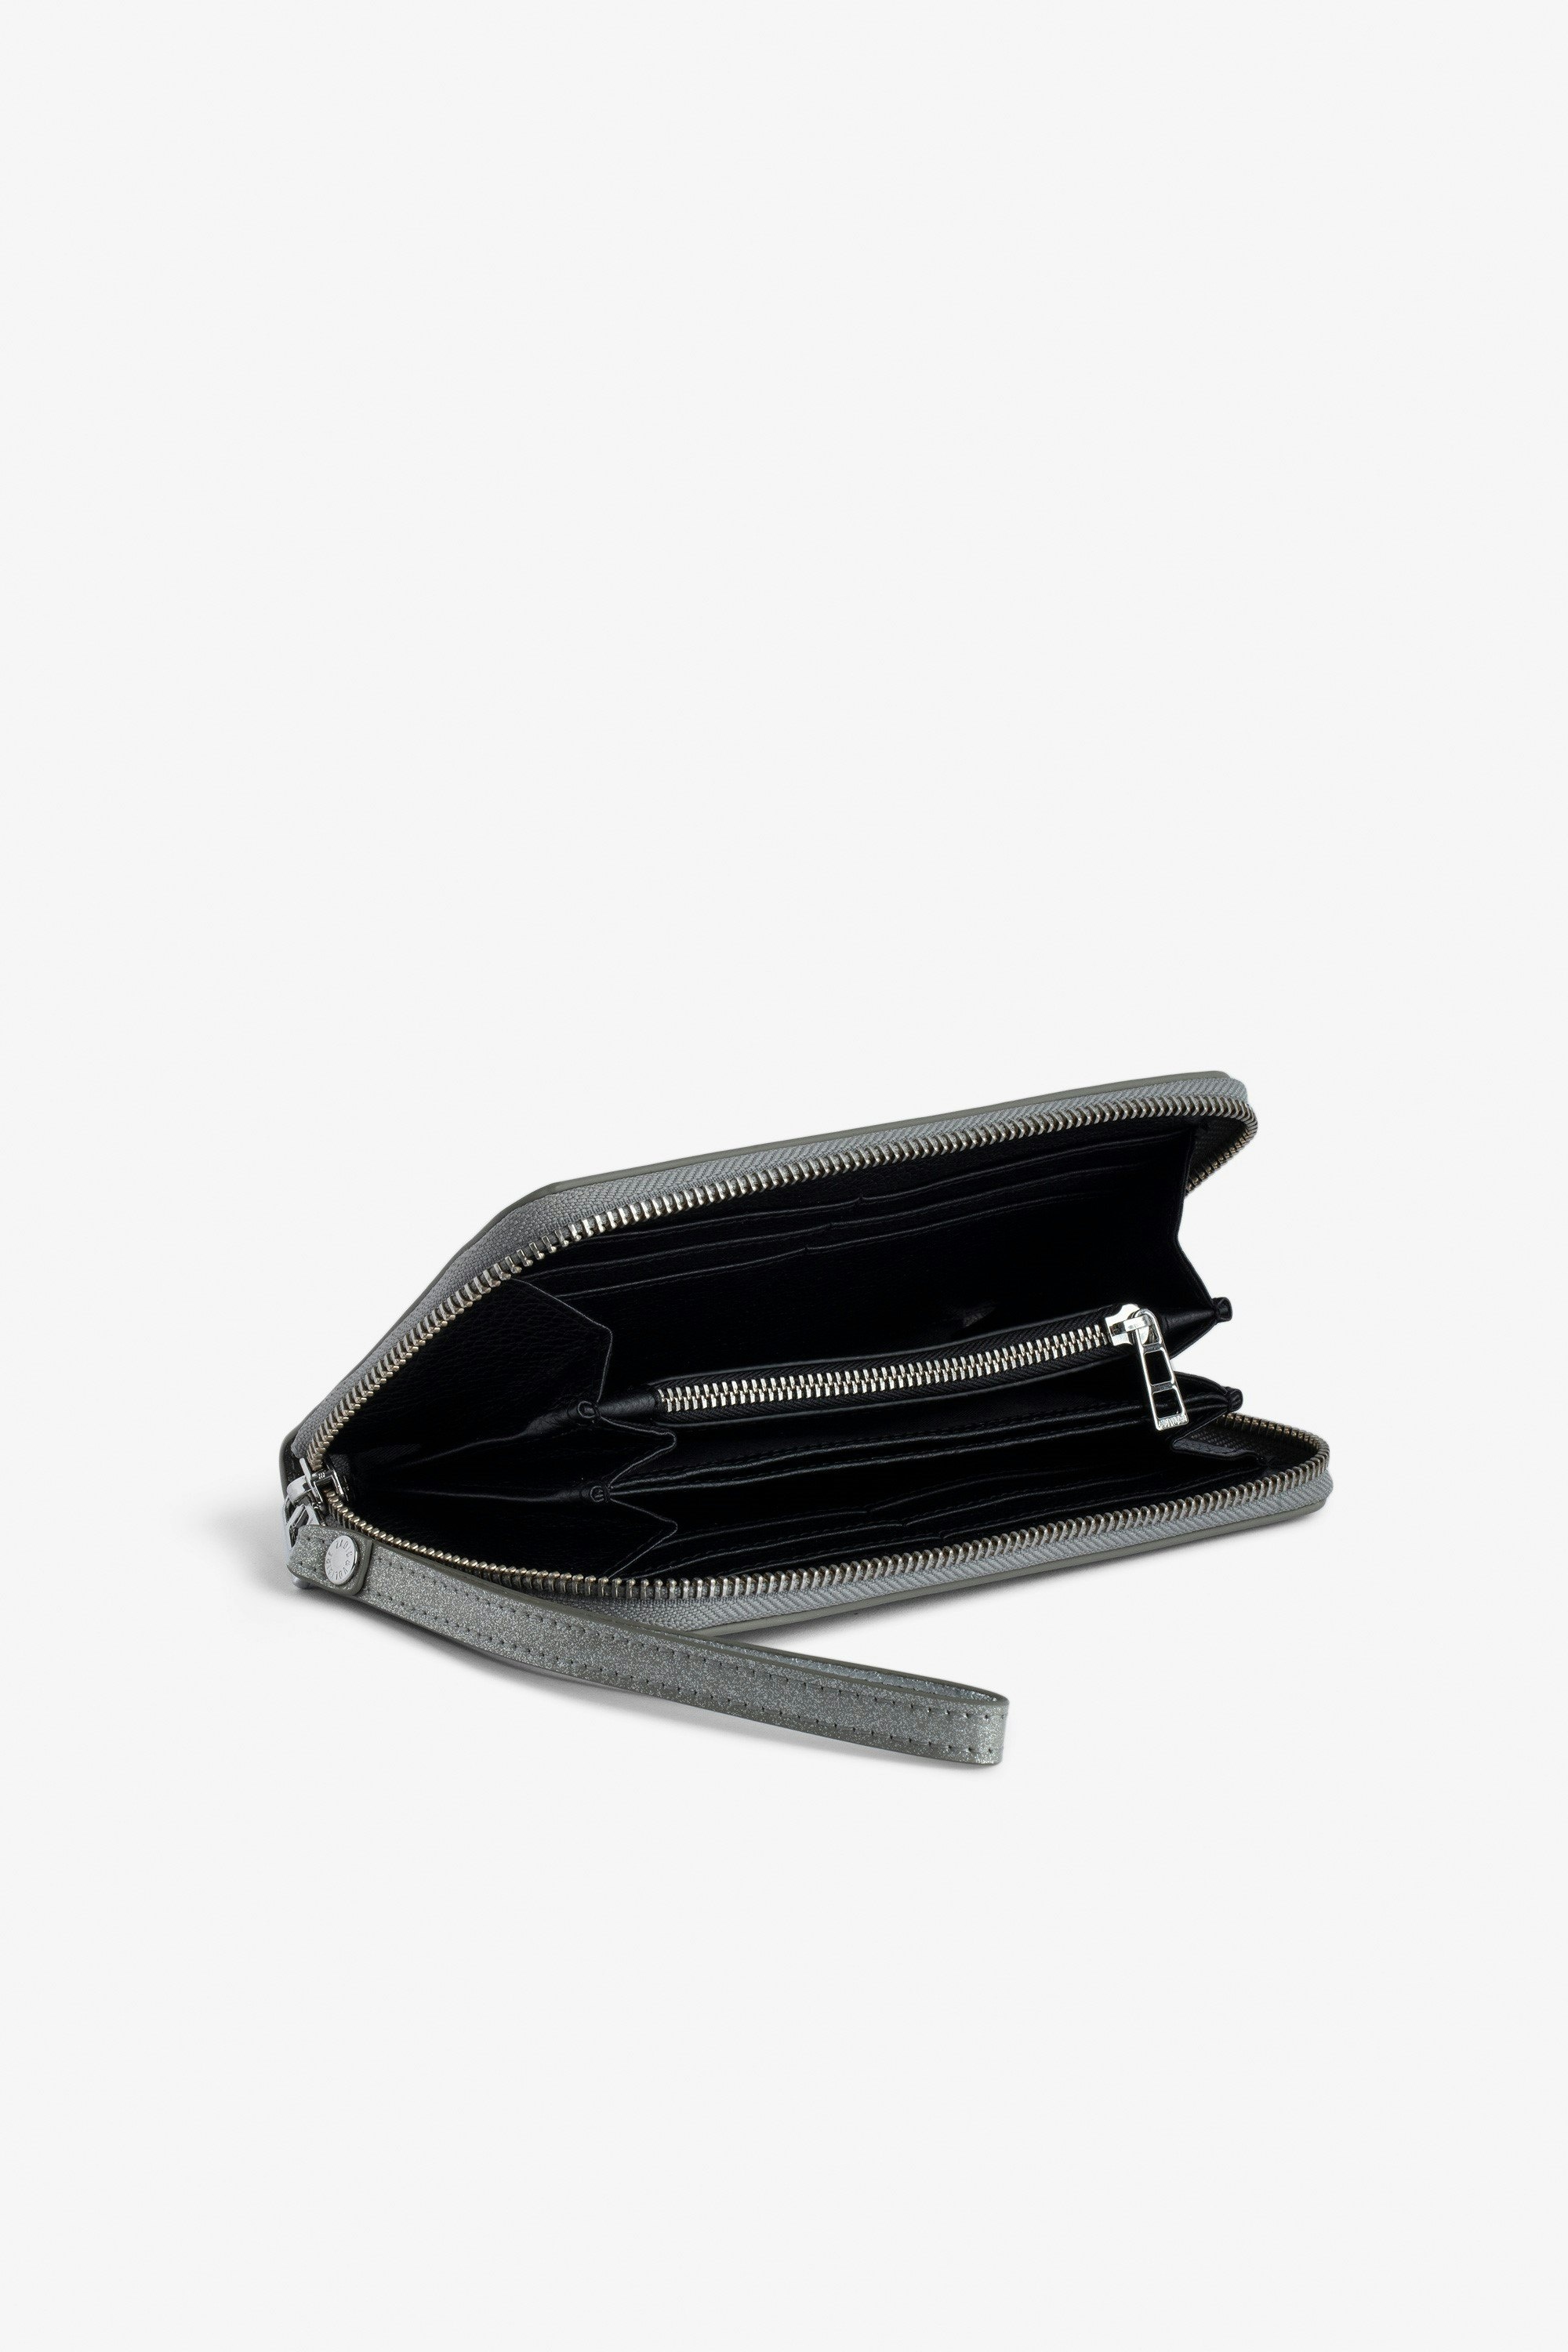 Compagnon Infinity Patent Wallet - 4